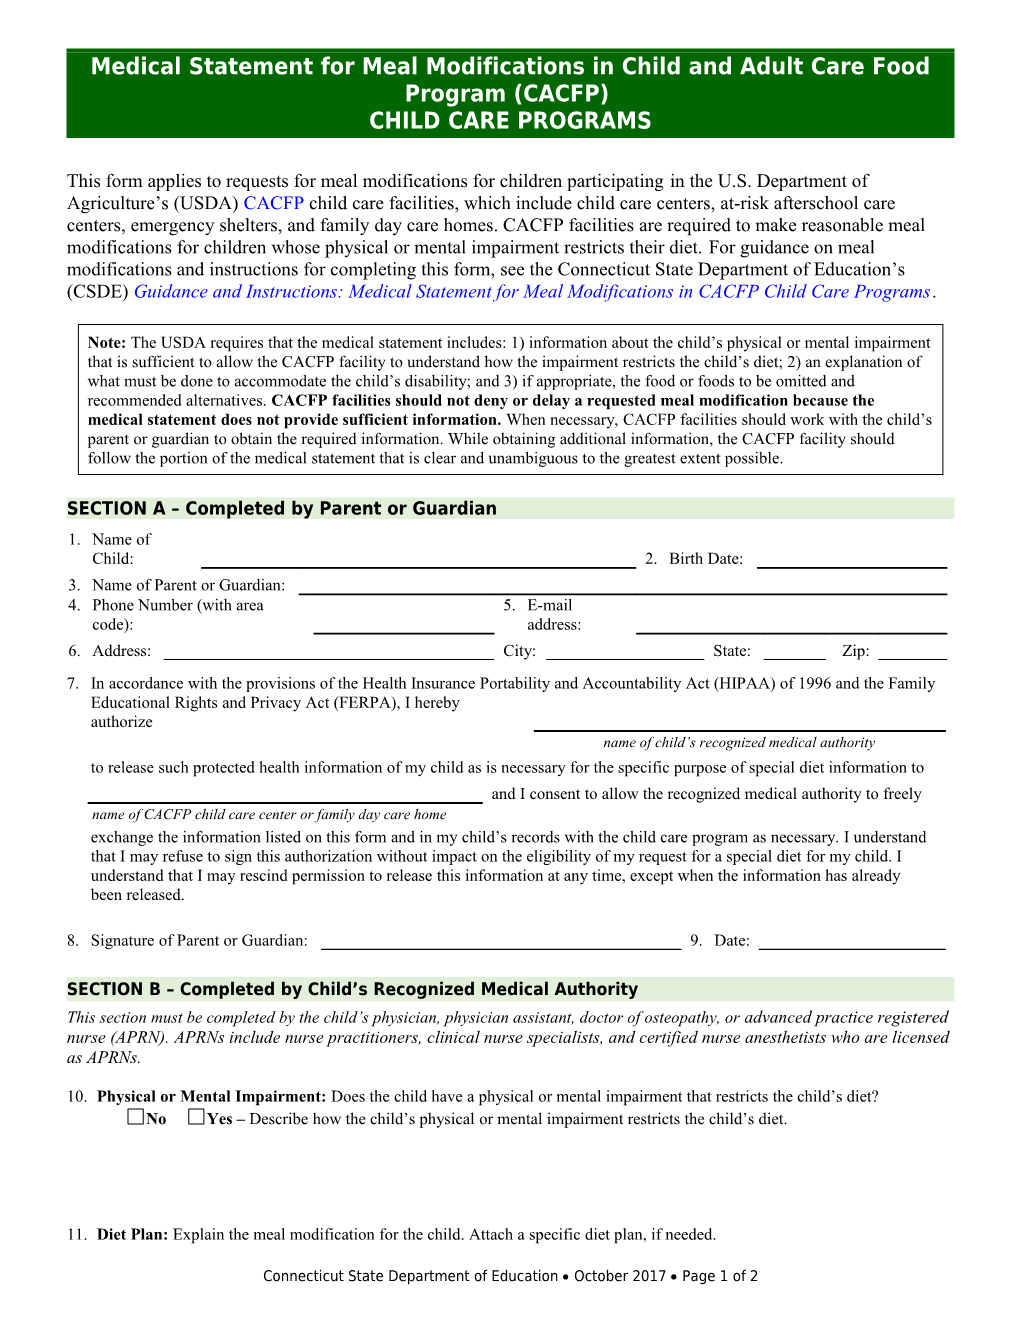 Medical Statement for Children with Disabilities